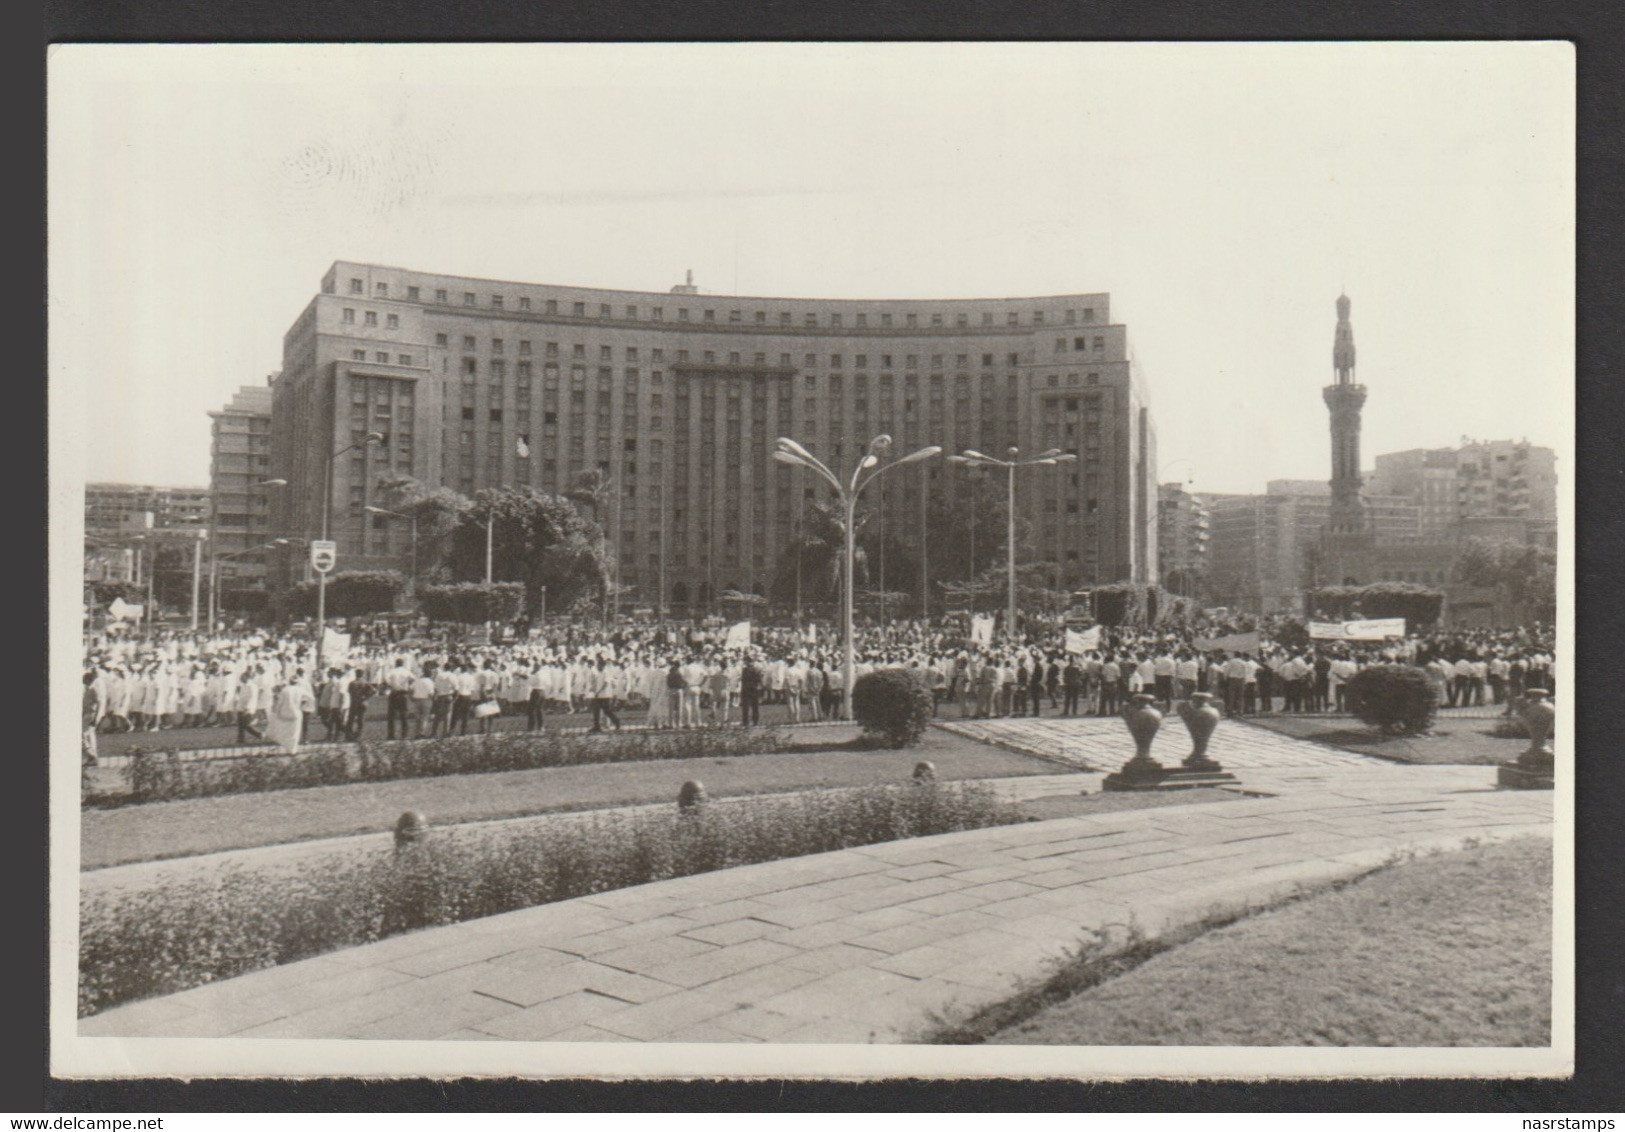 Egypt - Rare - Vintage Original Post Card - Demonstrate In Front Of The Tahrir Complex, Cairo - Briefe U. Dokumente